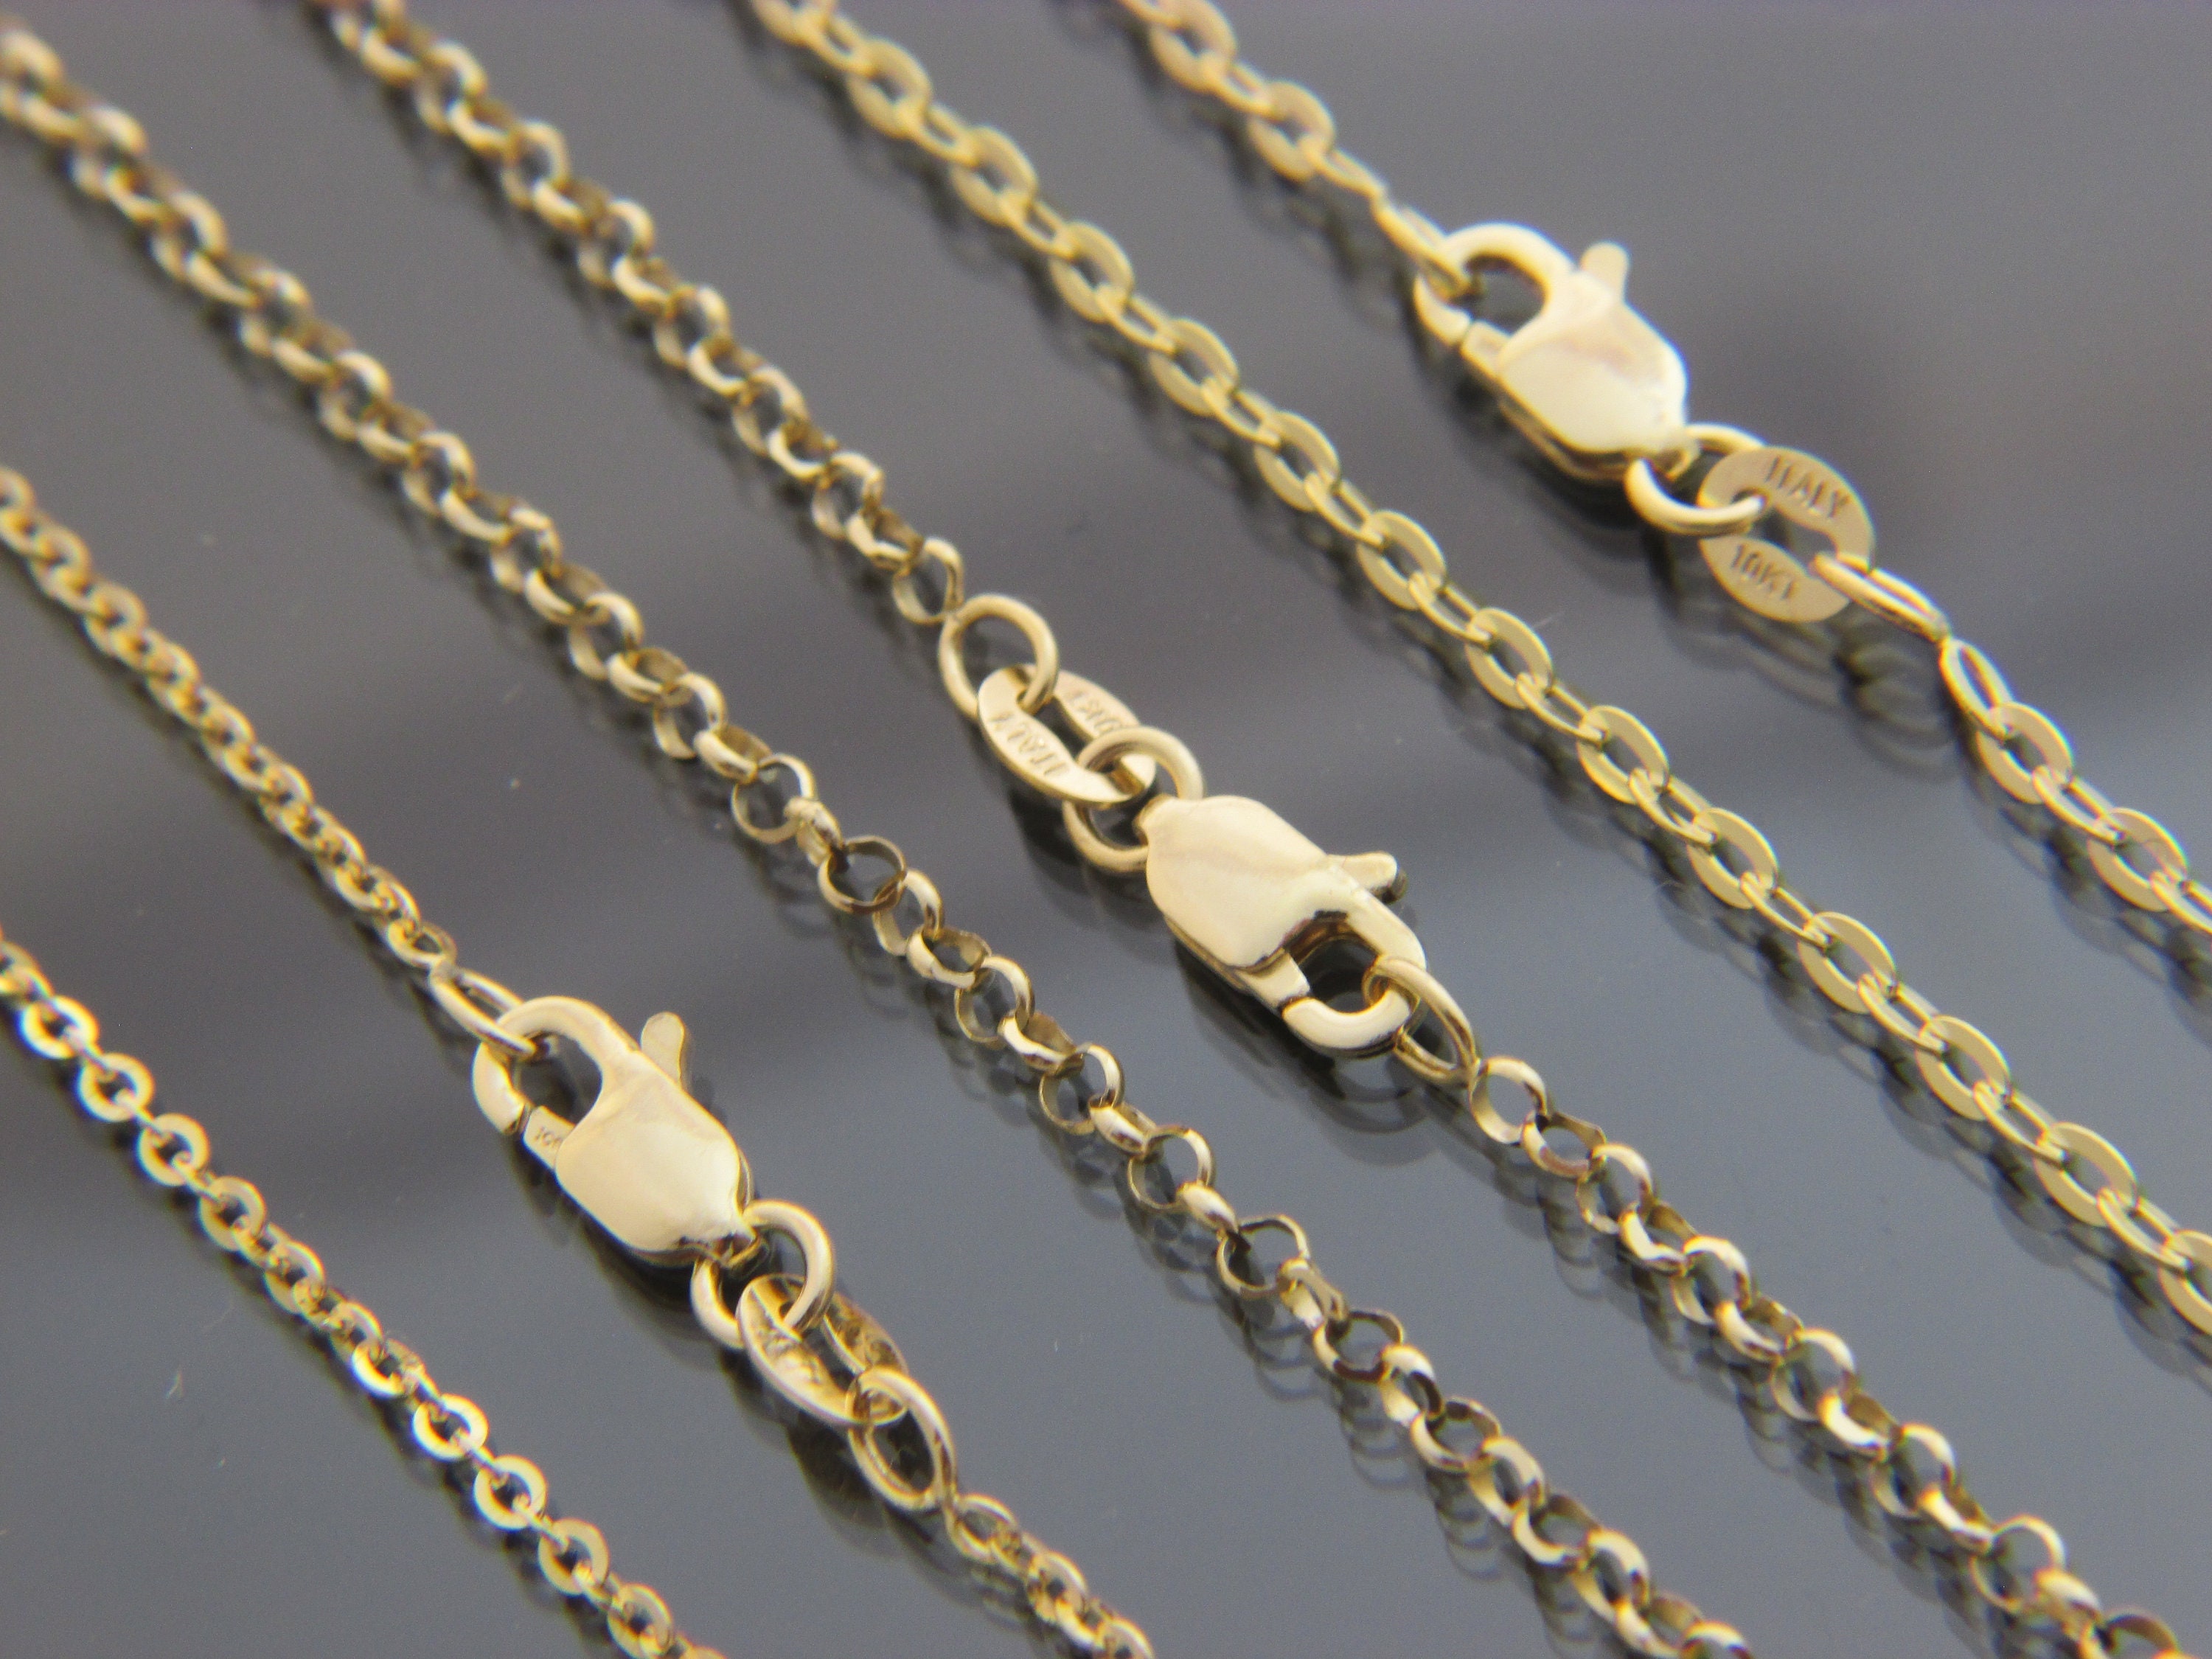 50mm or 70mm Necklace Extension Chain Bracelet Jewellery Link Connector  Finding